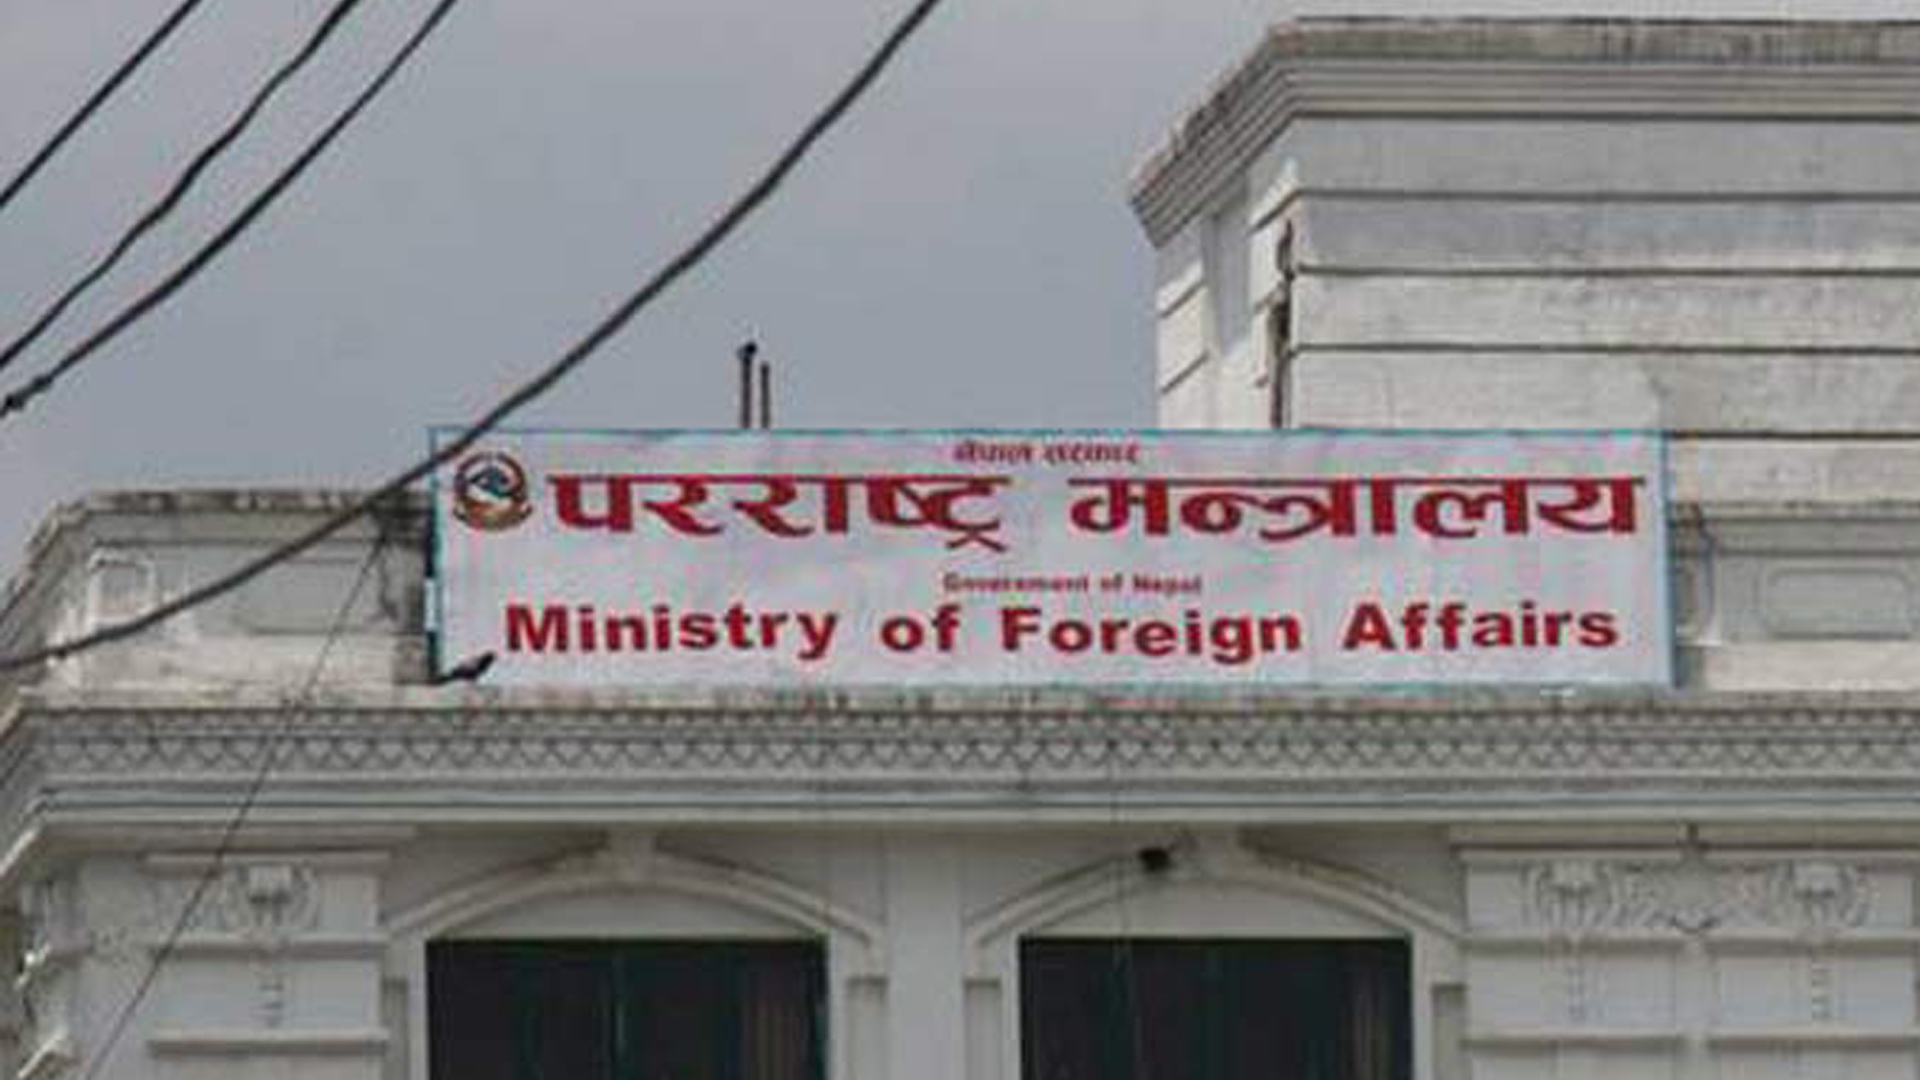 What is the policy of the Ministry of Foreign Affairs regarding SPP?